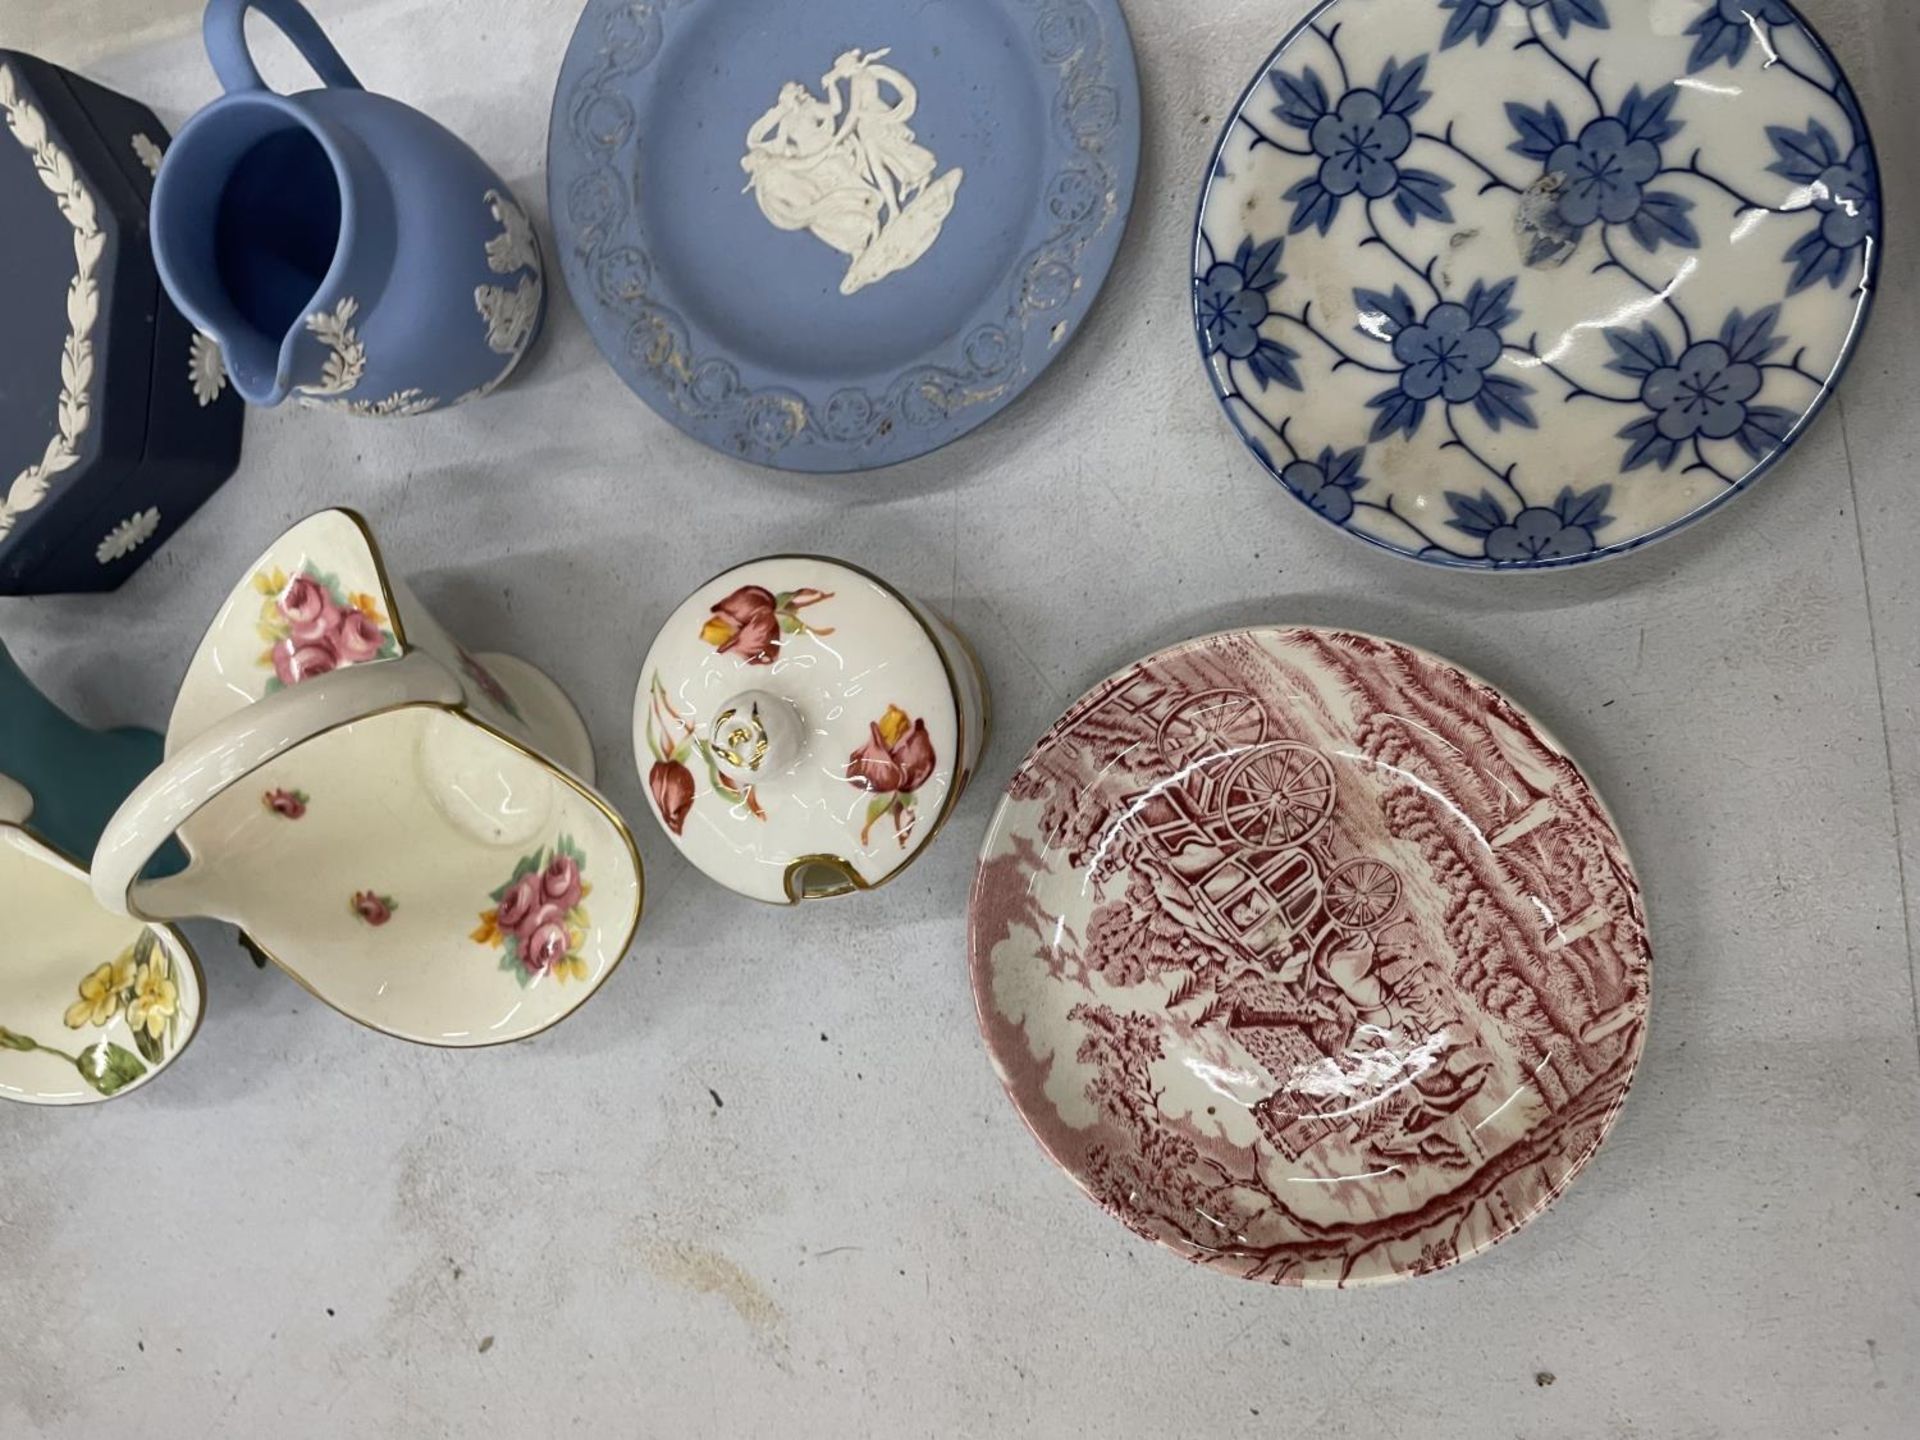 FIVE PIECES OF WEDGWOOD JASPERWARE, ROYAL DOULTON BASKETS, ETC - Image 2 of 5